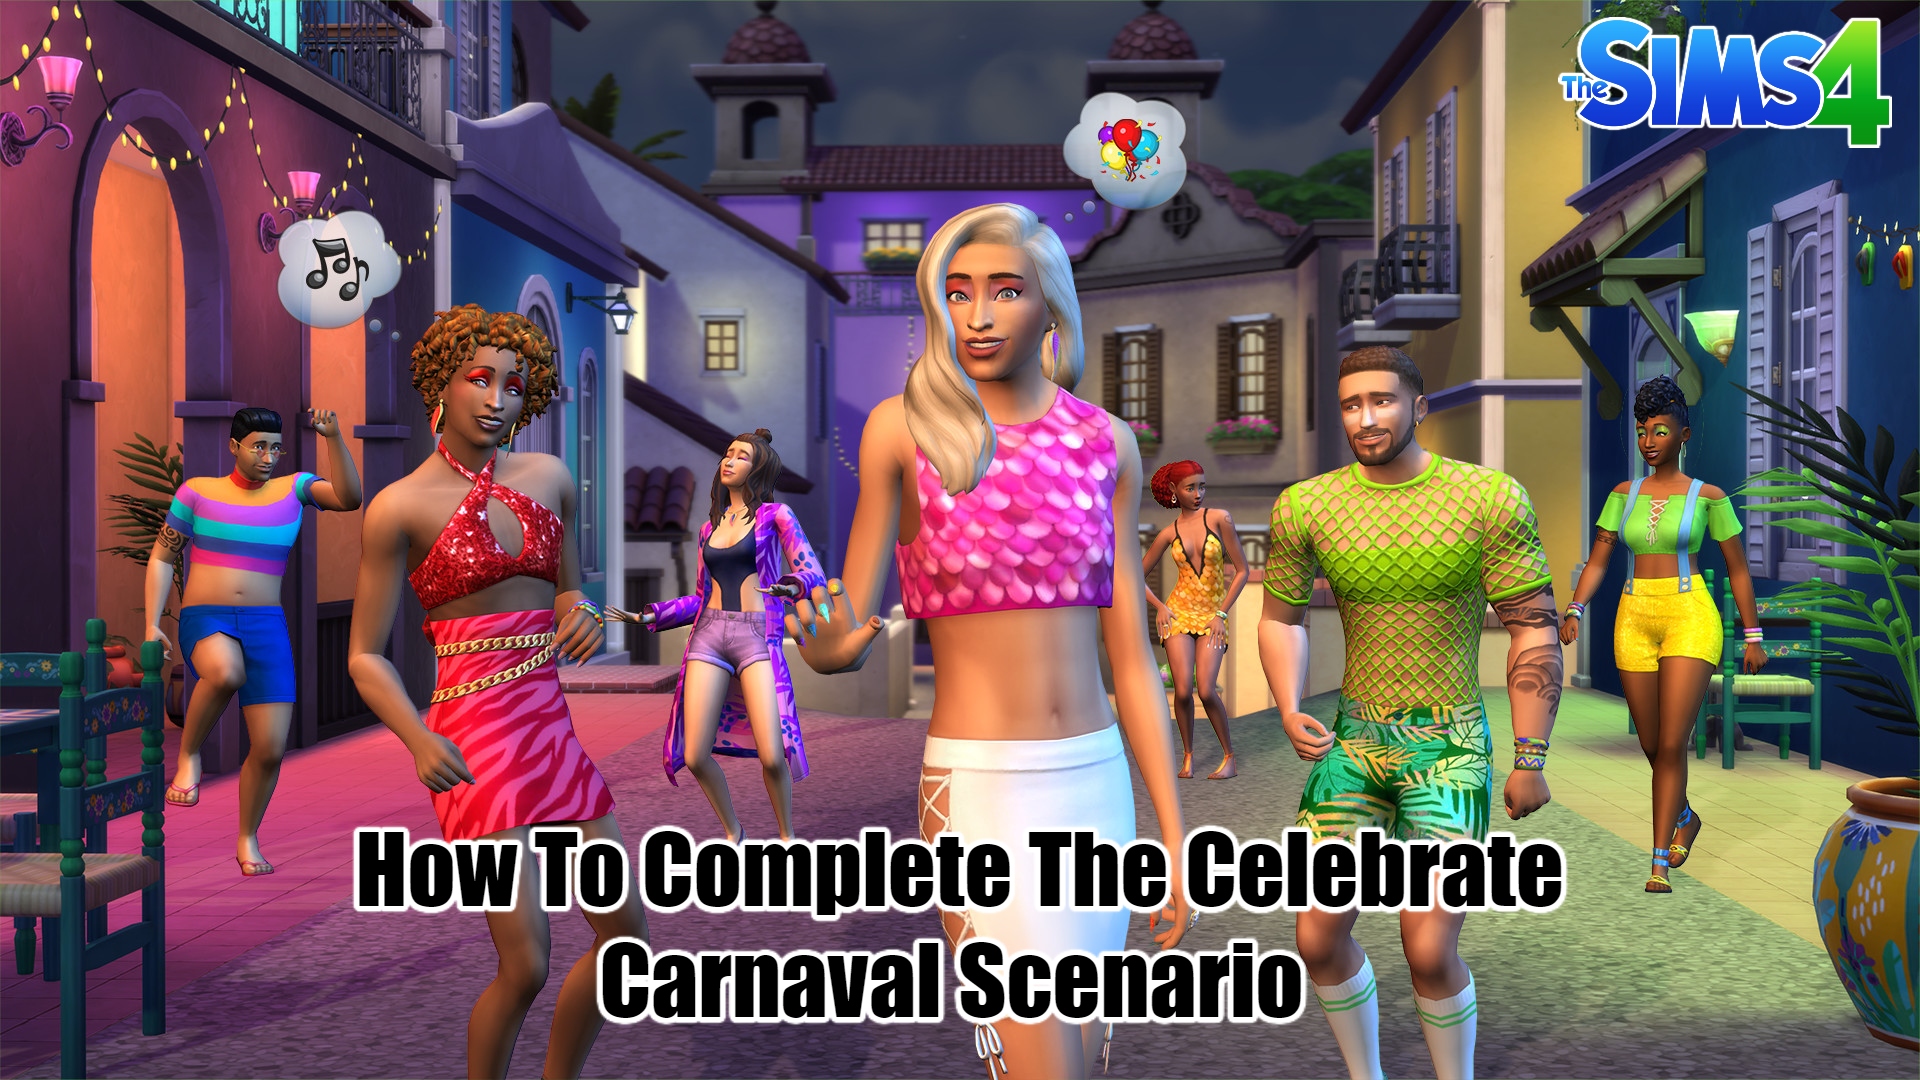 You are currently viewing How To Complete The Celebrate Carnaval Scenario In The Sims 4